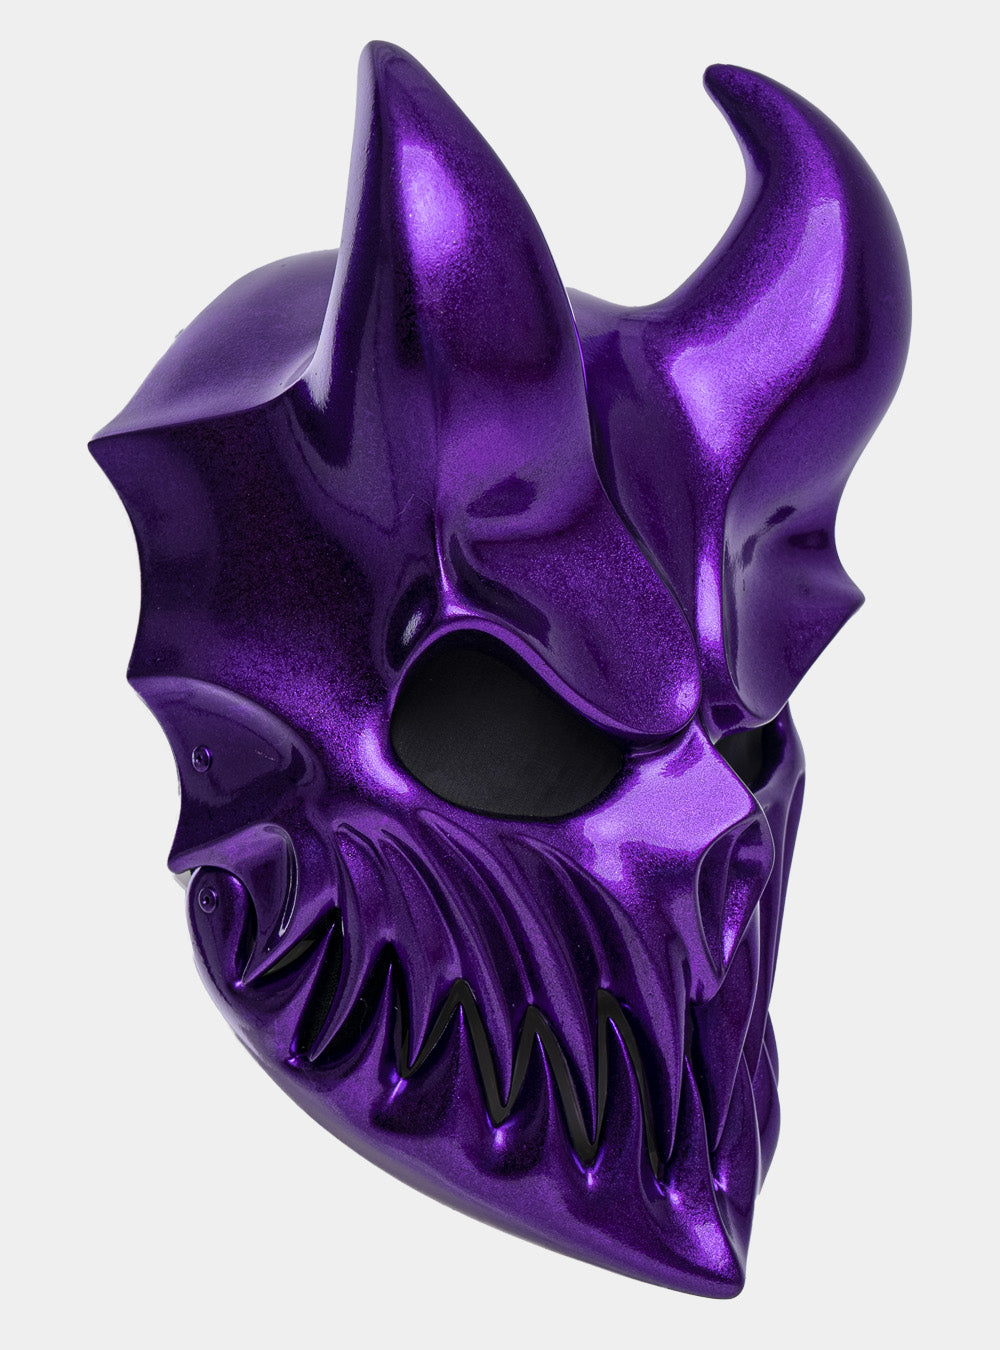 PURPLE MASK “KID OF DARKNESS” by ALEX TERRIBLE (SLAUGHTER TO